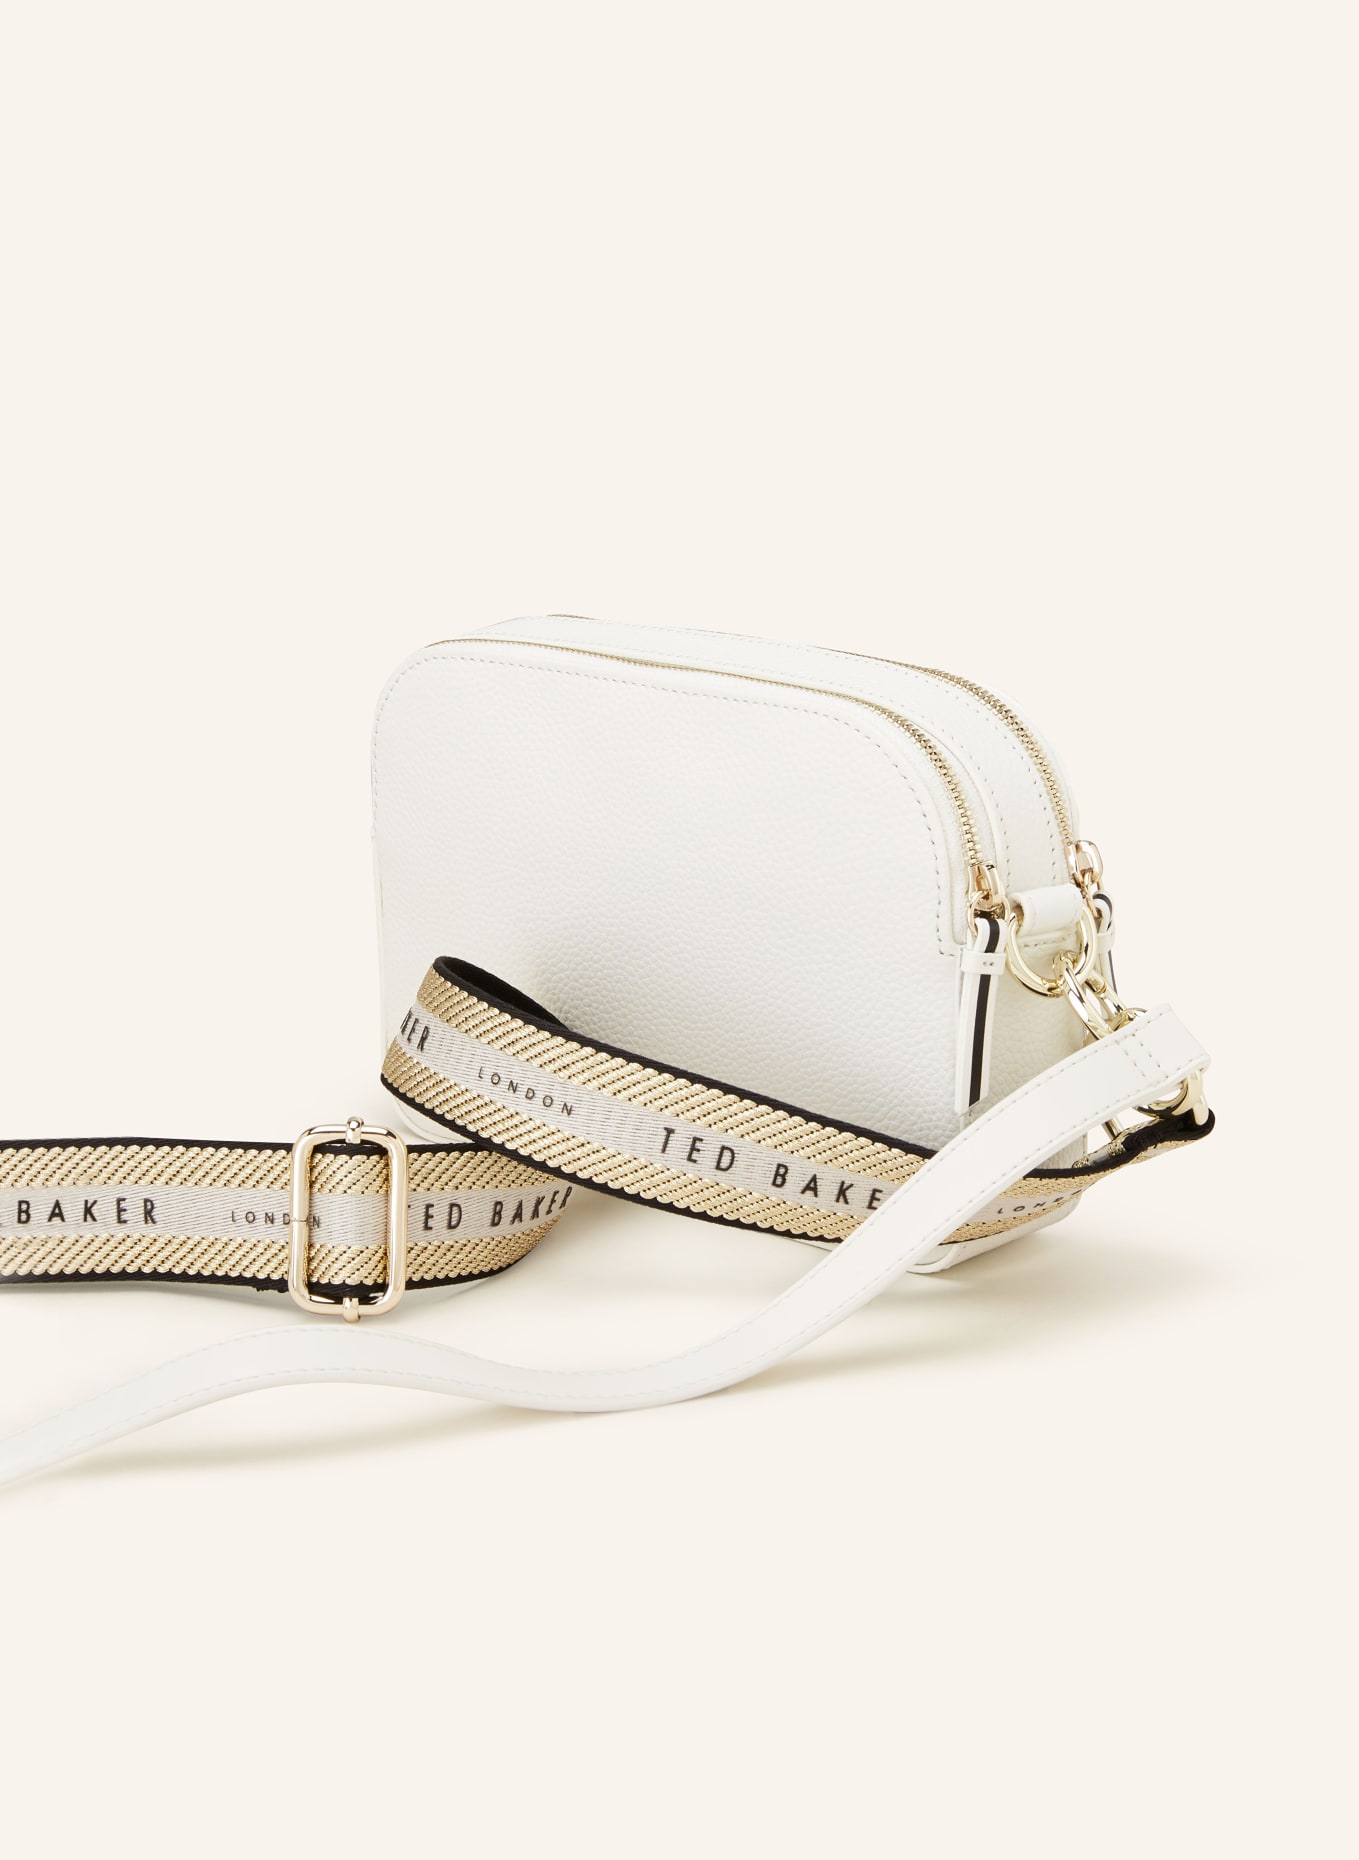 TED BAKER Crossbody bag DAILIAH, Color: WHITE (Image 2)